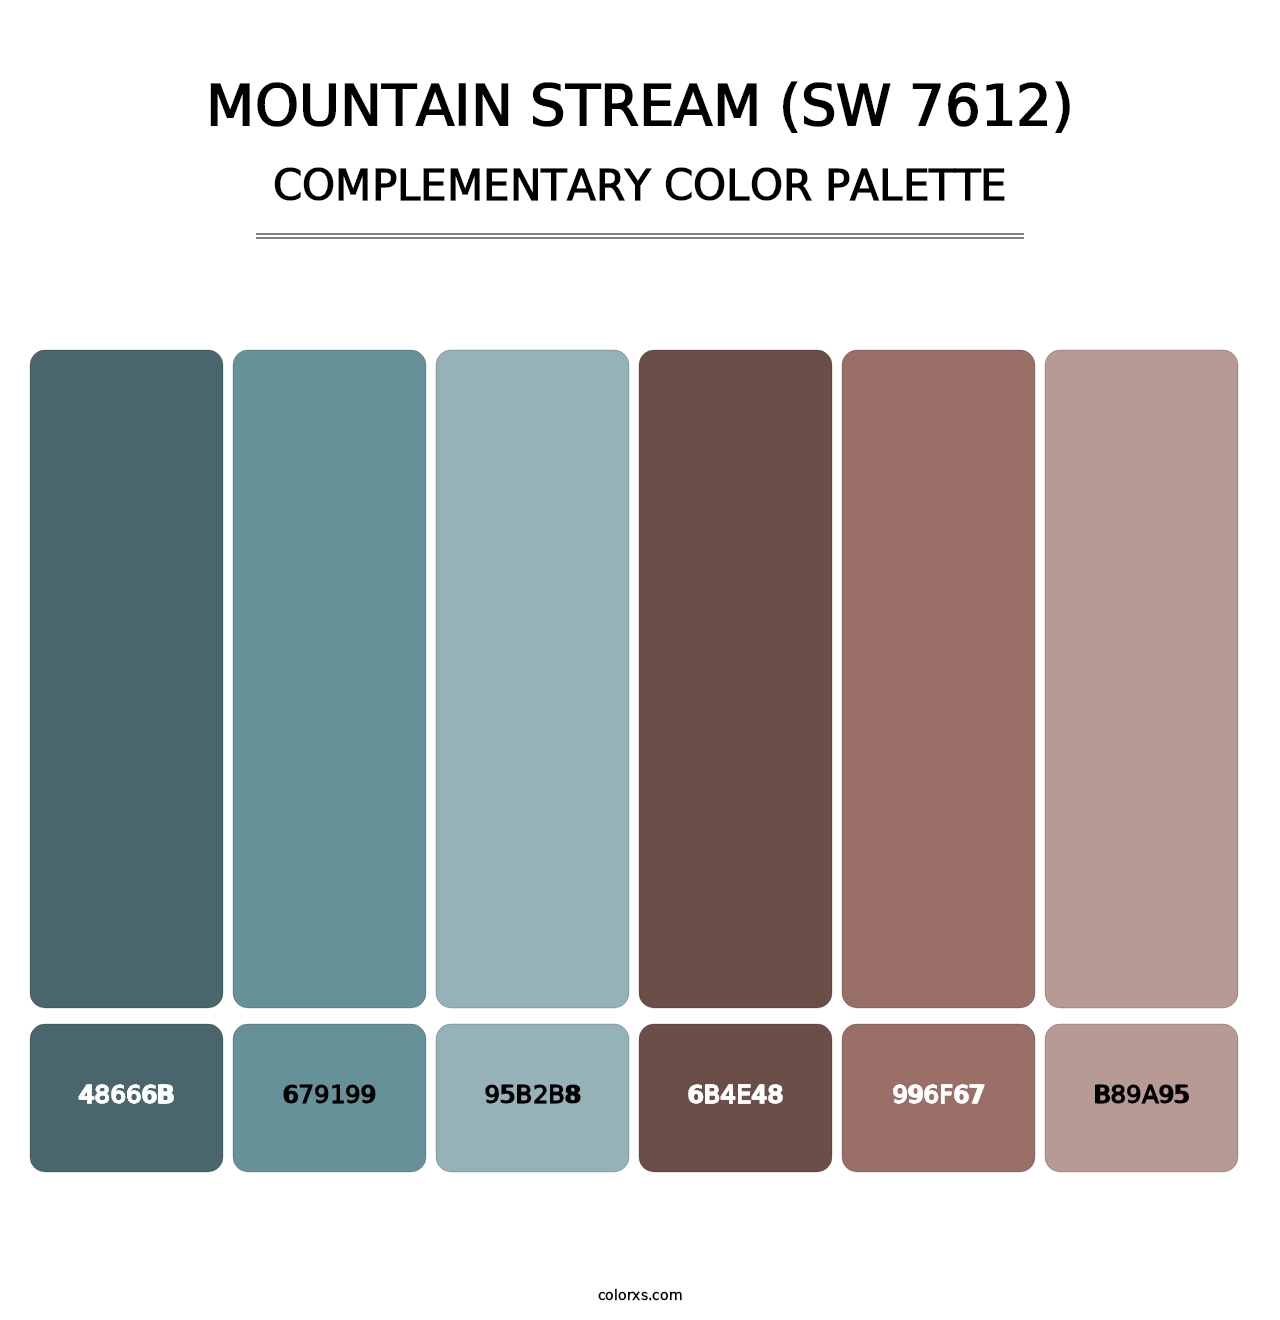 Mountain Stream (SW 7612) - Complementary Color Palette